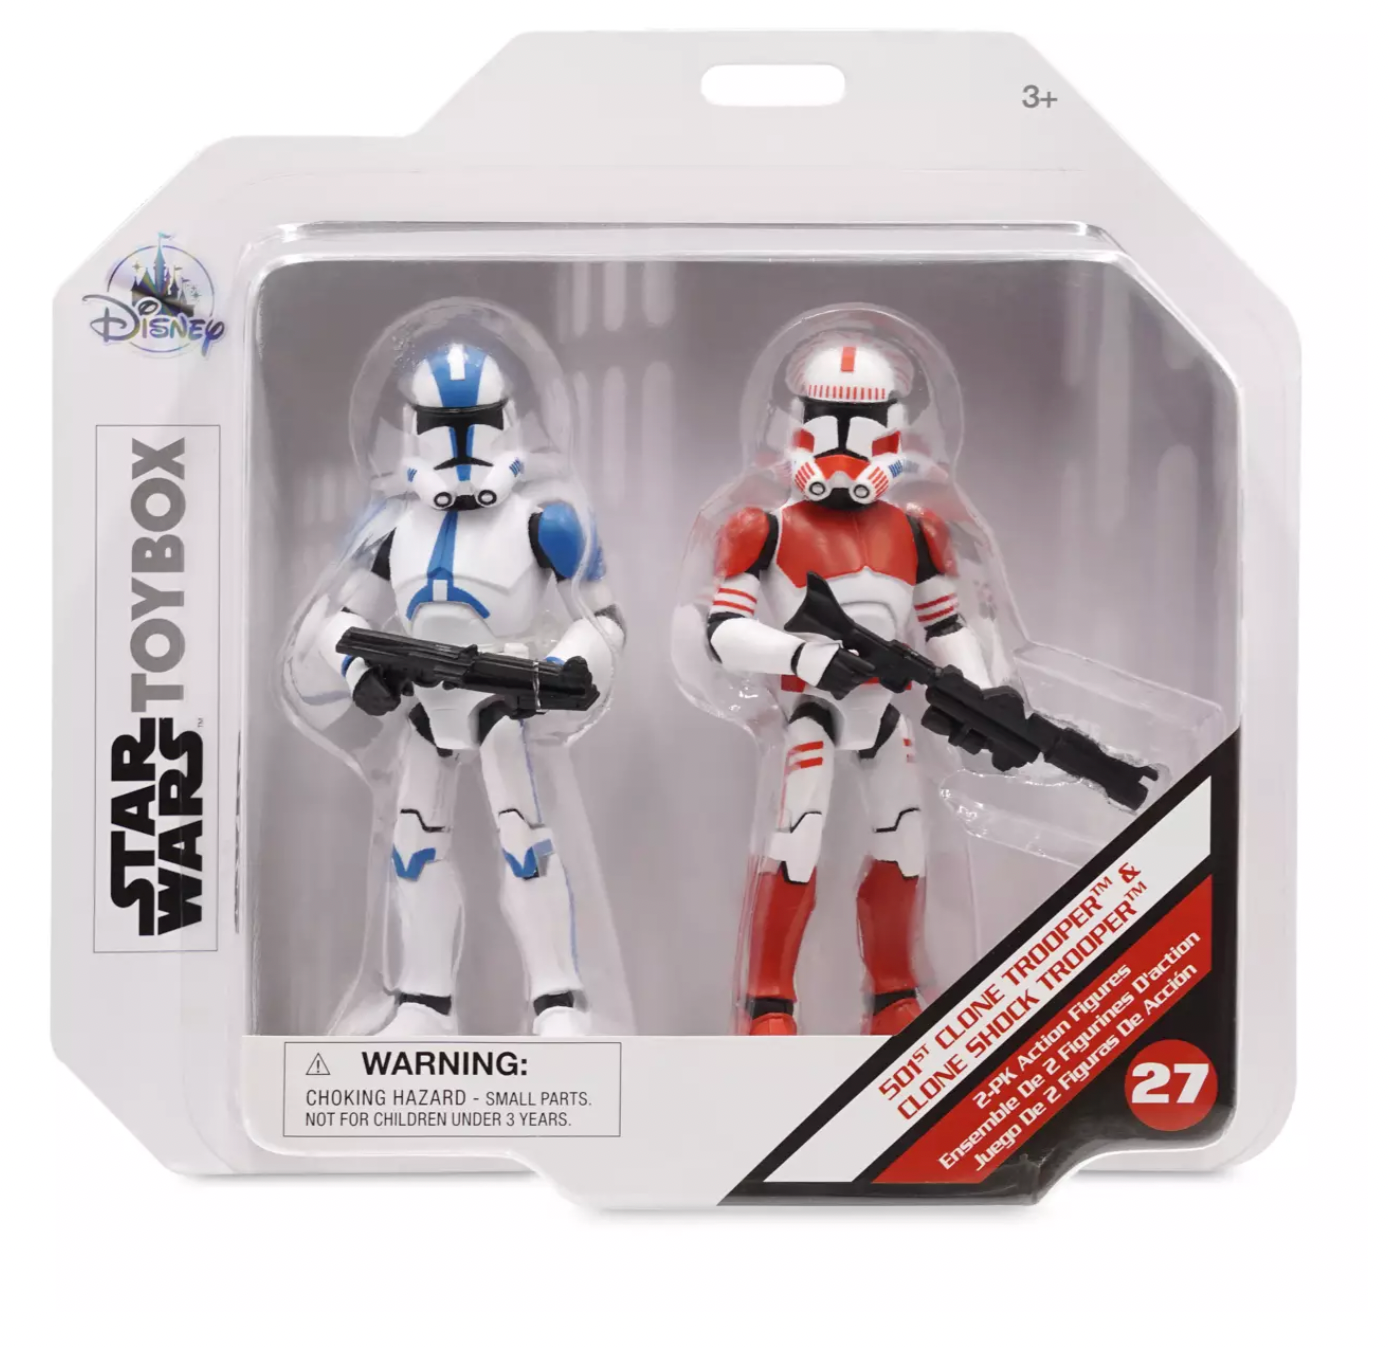 Disney Star Wars 501st Clone Trooper and Clone Shock Trooper Toybox New with Box